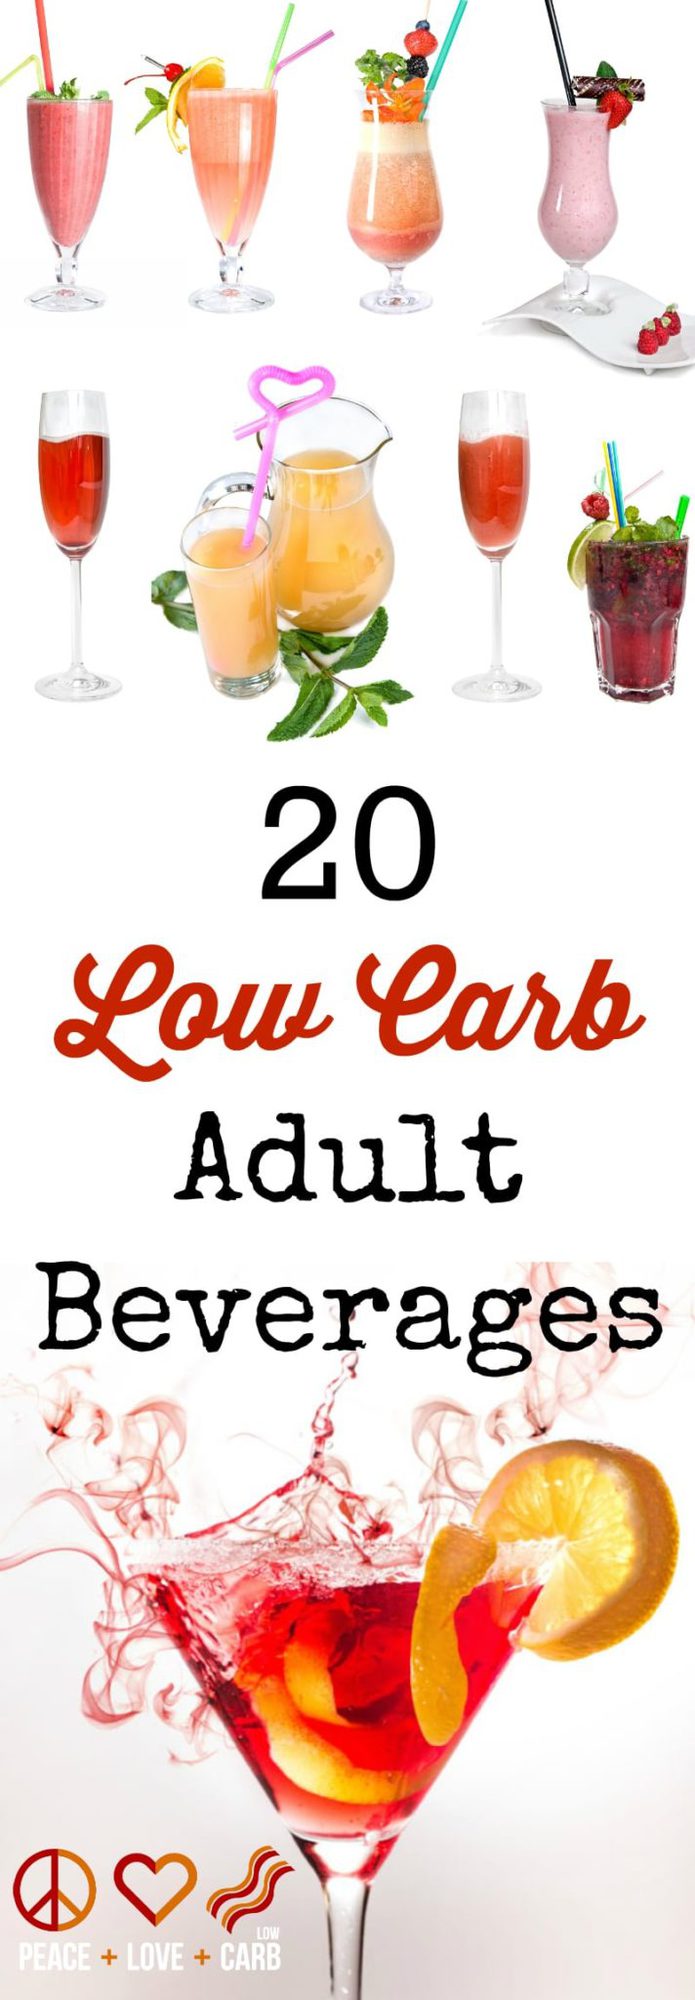 20 Low Carb Adult Beverages | Peace Love and Low Carb